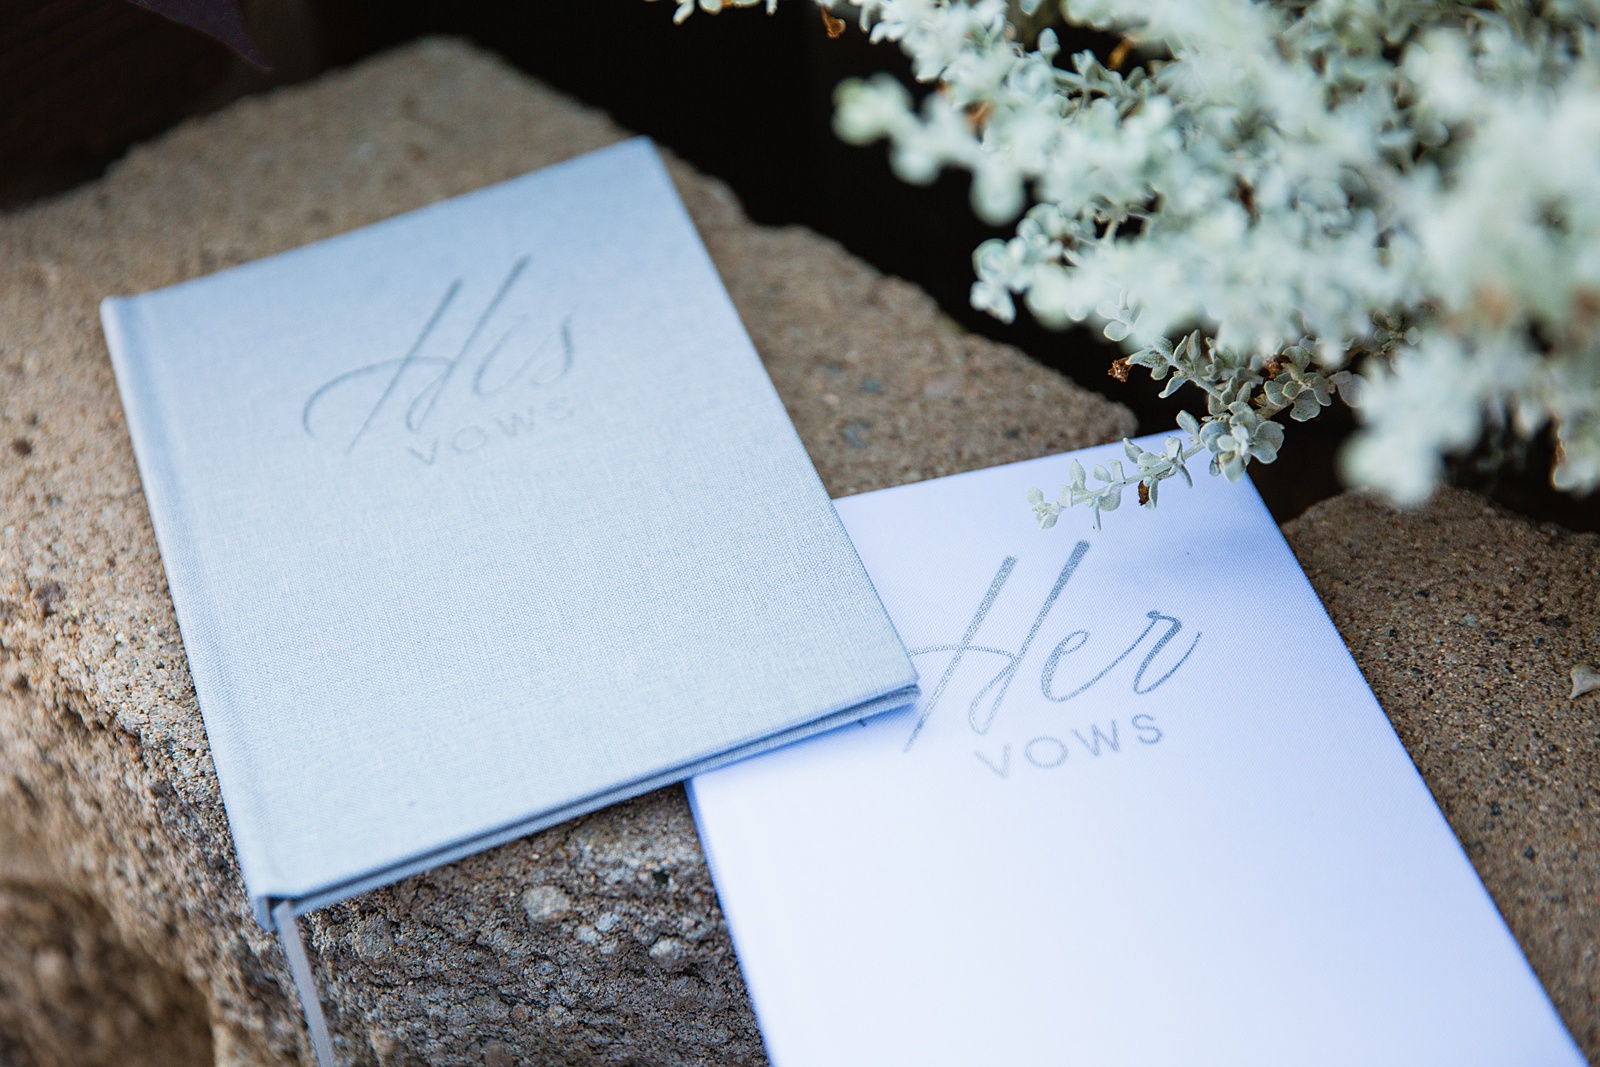 Grey his and her vow books for a garden elopement by Arizona elopement photographer PMA Photography.